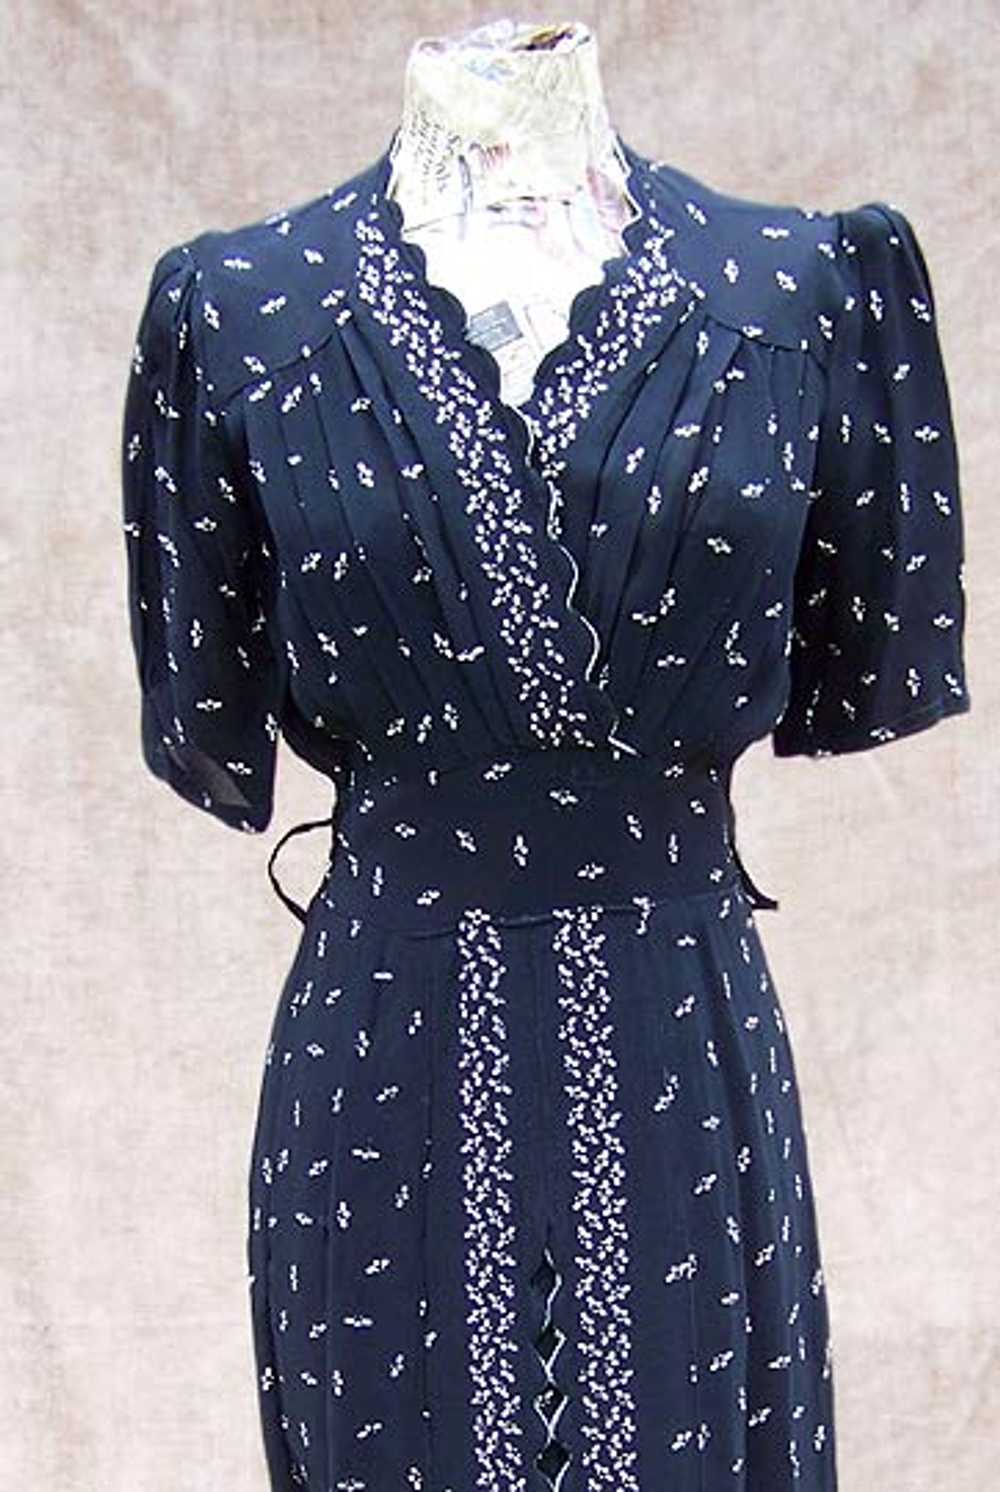 Stenciled & scalloped dress - image 6